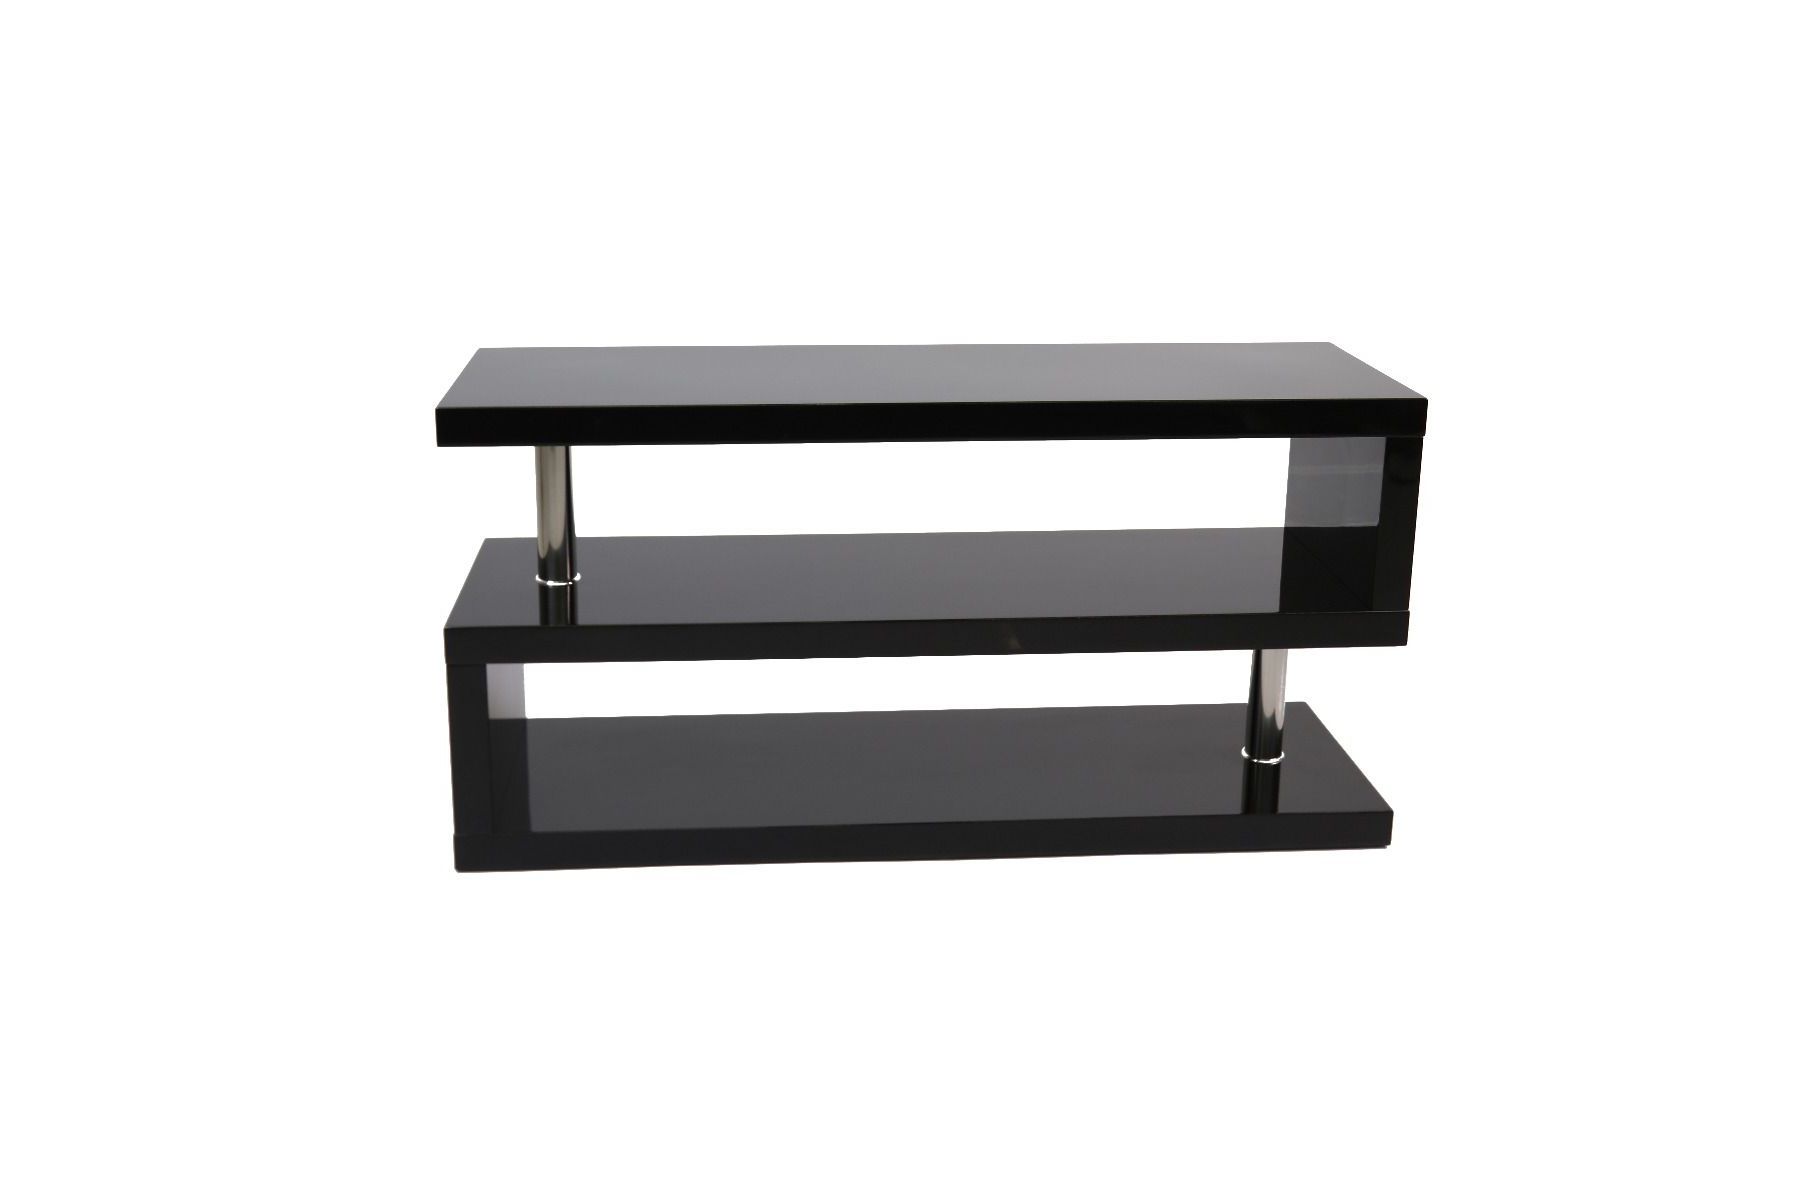 Black Gloss Tv Stands Throughout 2017 How To Paint Over High Gloss Furniture Black Lacquer Dresser White (View 20 of 20)